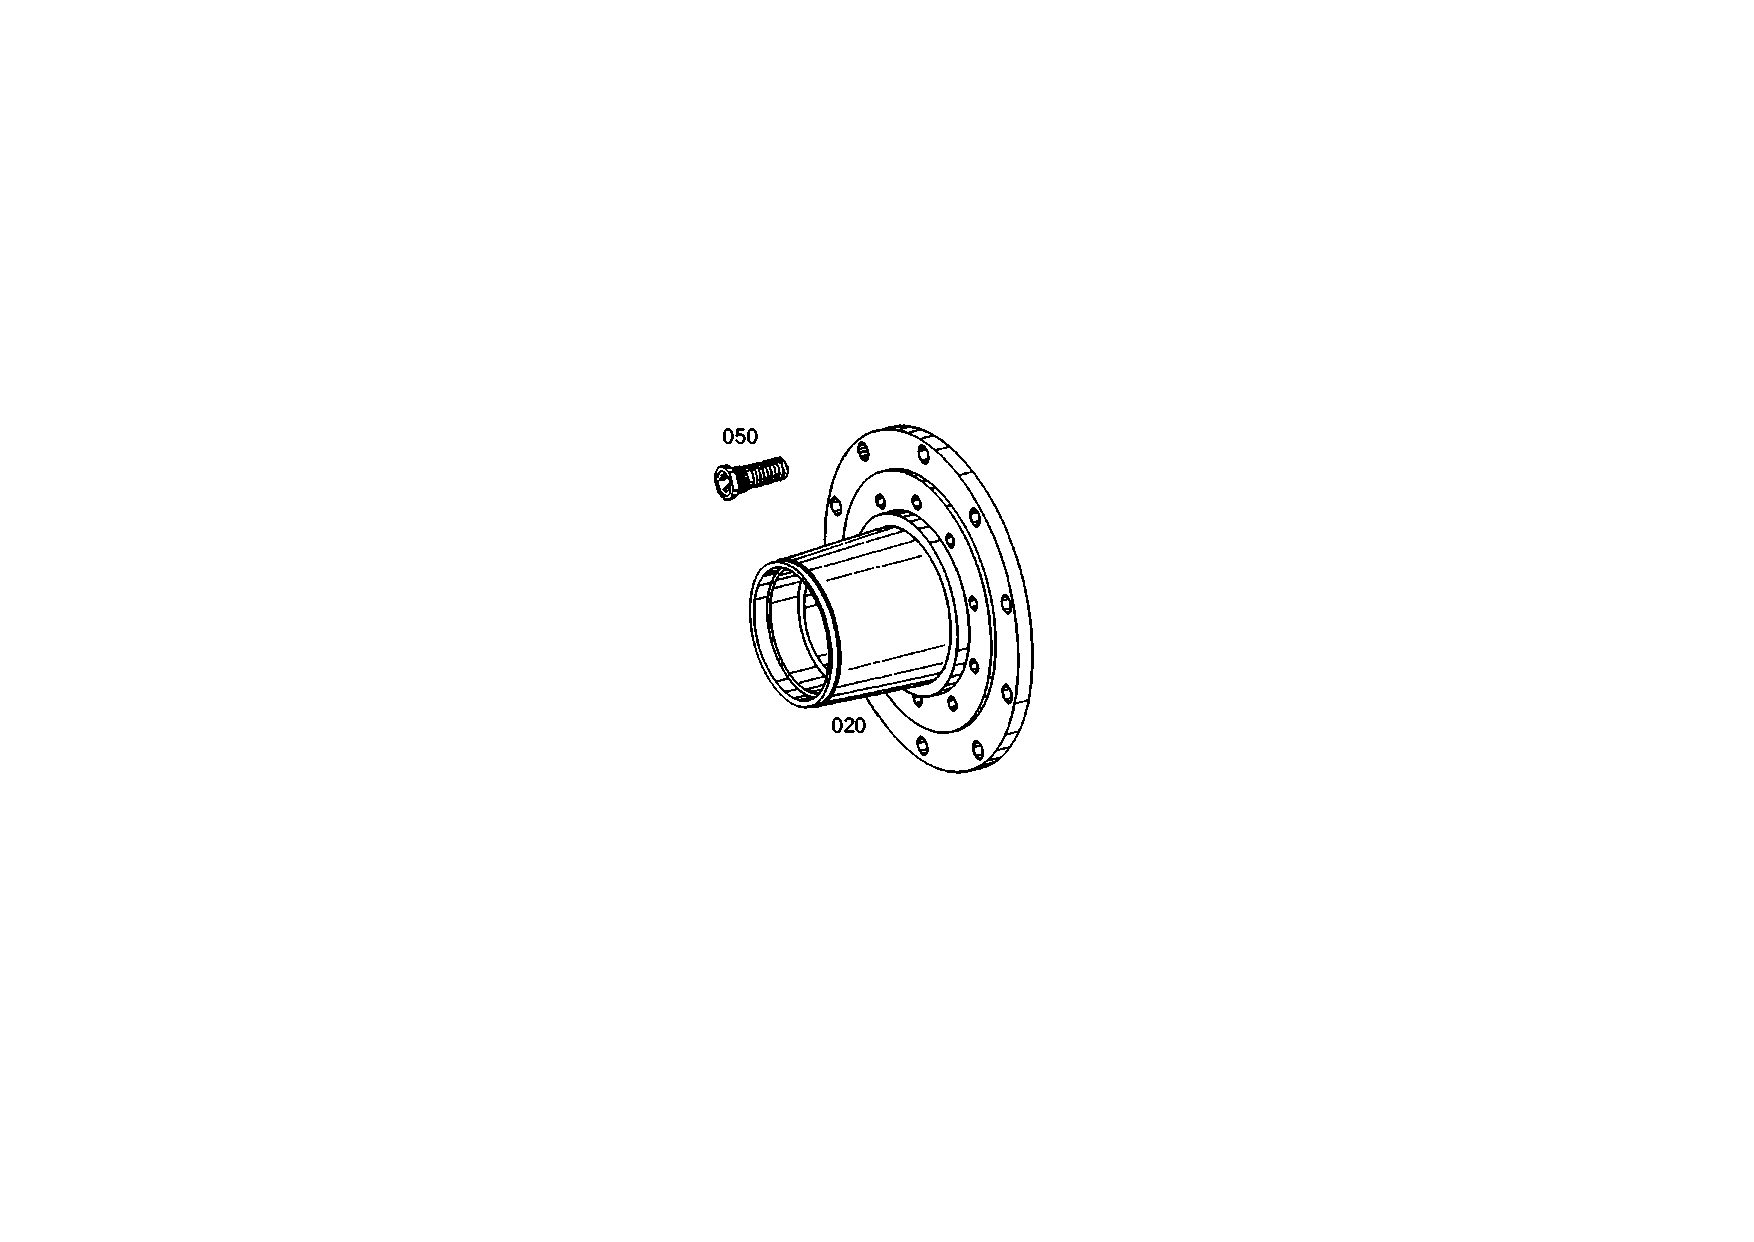 drawing for E. N. M. T. P. / CPG (520304008) - WHEEL STUD (figure 1)